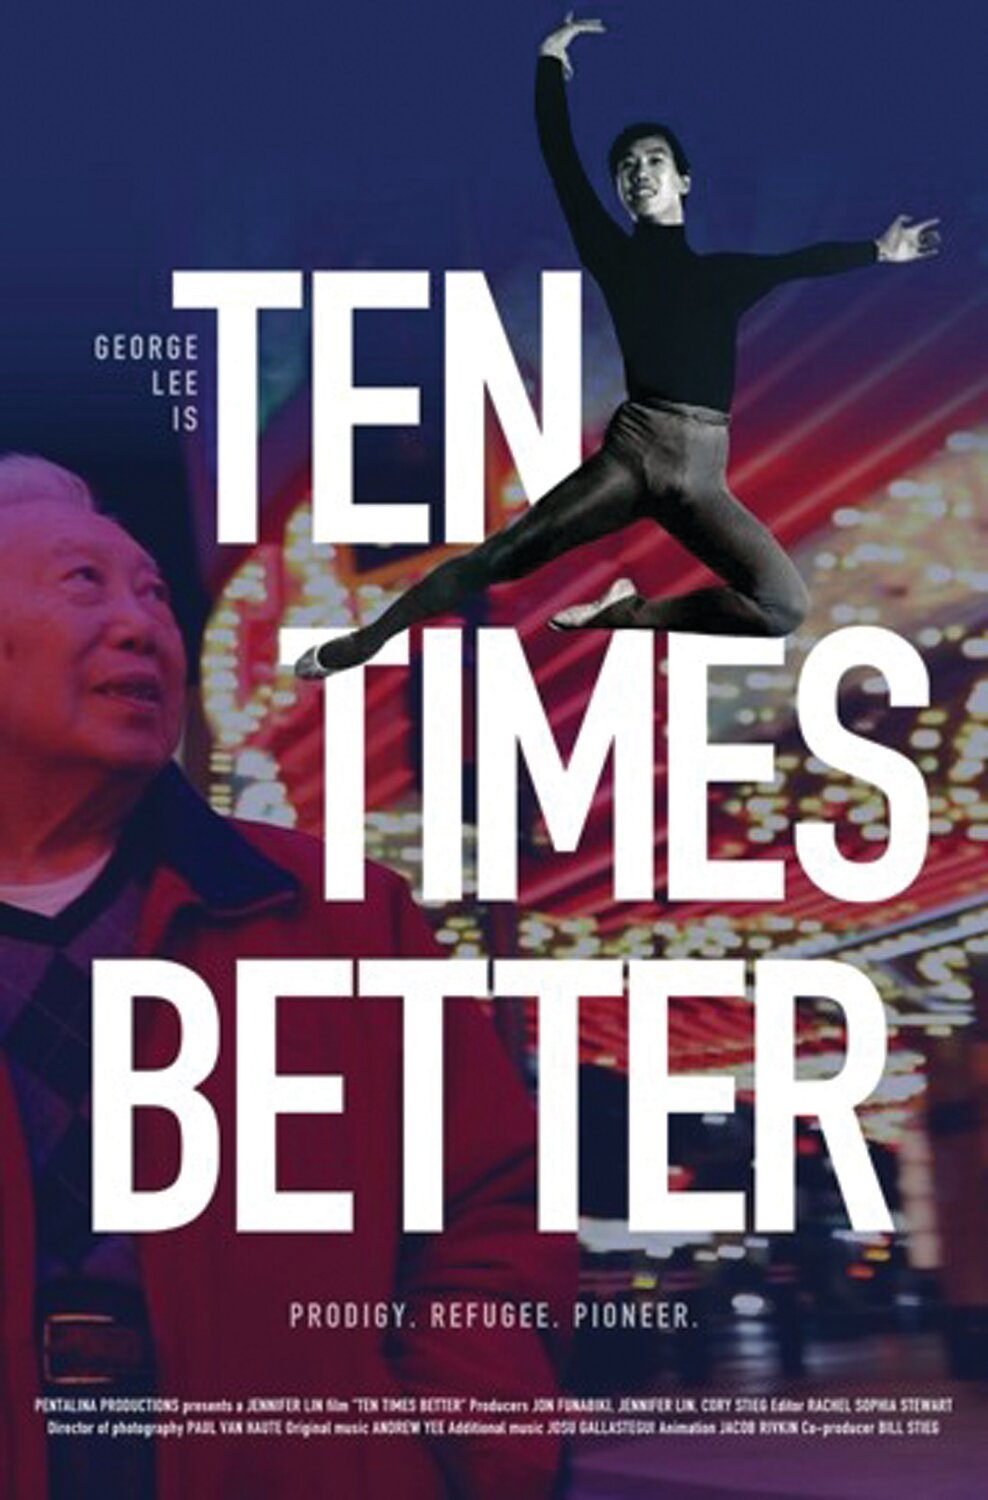 Documentary “Ten Times Better” tells the story of George Lee, an 88-year-old blackjack dealer in Las Vegas, who originated the Tea role in George Balanchine’s The Nutcracker.